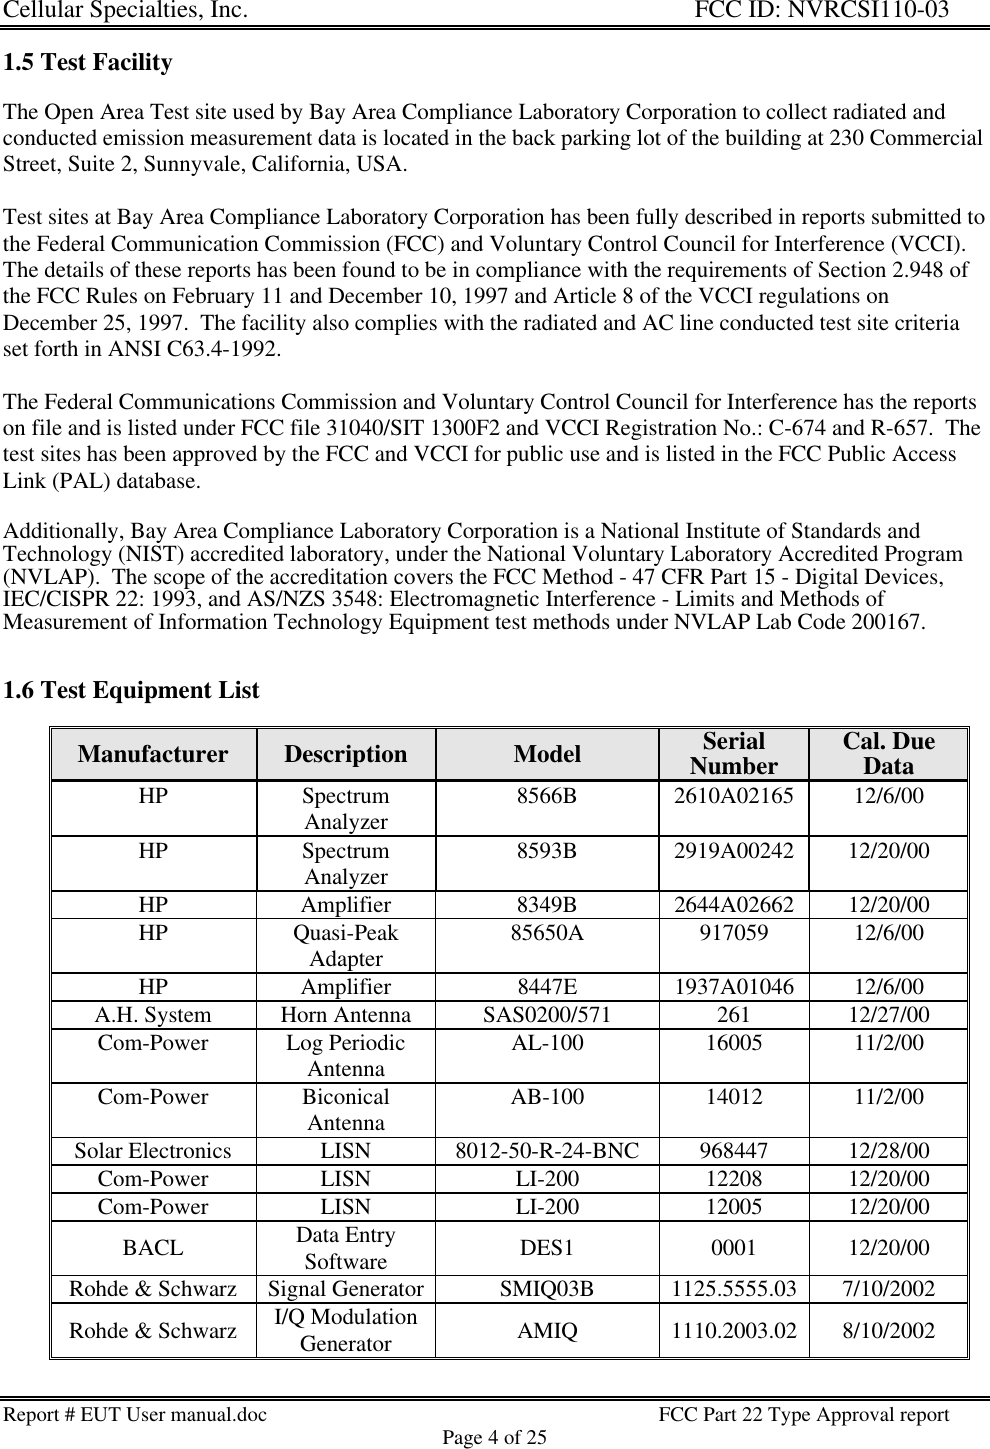 Cellular Specialties, Inc. FCC ID: NVRCSI110-03Report # EUT User manual.doc FCC Part 22 Type Approval reportPage 4 of 251.5 Test FacilityThe Open Area Test site used by Bay Area Compliance Laboratory Corporation to collect radiated andconducted emission measurement data is located in the back parking lot of the building at 230 CommercialStreet, Suite 2, Sunnyvale, California, USA.Test sites at Bay Area Compliance Laboratory Corporation has been fully described in reports submitted tothe Federal Communication Commission (FCC) and Voluntary Control Council for Interference (VCCI).The details of these reports has been found to be in compliance with the requirements of Section 2.948 ofthe FCC Rules on February 11 and December 10, 1997 and Article 8 of the VCCI regulations onDecember 25, 1997.  The facility also complies with the radiated and AC line conducted test site criteriaset forth in ANSI C63.4-1992.The Federal Communications Commission and Voluntary Control Council for Interference has the reportson file and is listed under FCC file 31040/SIT 1300F2 and VCCI Registration No.: C-674 and R-657.  Thetest sites has been approved by the FCC and VCCI for public use and is listed in the FCC Public AccessLink (PAL) database.Additionally, Bay Area Compliance Laboratory Corporation is a National Institute of Standards andTechnology (NIST) accredited laboratory, under the National Voluntary Laboratory Accredited Program(NVLAP).  The scope of the accreditation covers the FCC Method - 47 CFR Part 15 - Digital Devices,IEC/CISPR 22: 1993, and AS/NZS 3548: Electromagnetic Interference - Limits and Methods ofMeasurement of Information Technology Equipment test methods under NVLAP Lab Code 200167.1.6 Test Equipment ListManufacturer Description Model SerialNumber Cal. DueDataHP SpectrumAnalyzer 8566B 2610A02165 12/6/00HP SpectrumAnalyzer 8593B 2919A00242 12/20/00HP Amplifier 8349B 2644A02662 12/20/00HP Quasi-PeakAdapter 85650A 917059 12/6/00HP Amplifier 8447E 1937A01046 12/6/00A.H. System Horn Antenna SAS0200/571 261 12/27/00Com-Power Log PeriodicAntenna AL-100 16005 11/2/00Com-Power BiconicalAntenna AB-100 14012 11/2/00Solar Electronics LISN 8012-50-R-24-BNC 968447 12/28/00Com-Power LISN LI-200 12208 12/20/00Com-Power LISN LI-200 12005 12/20/00BACL Data EntrySoftware DES1 0001 12/20/00Rohde &amp; Schwarz Signal Generator SMIQ03B 1125.5555.03 7/10/2002Rohde &amp; Schwarz I/Q ModulationGenerator AMIQ 1110.2003.02 8/10/2002